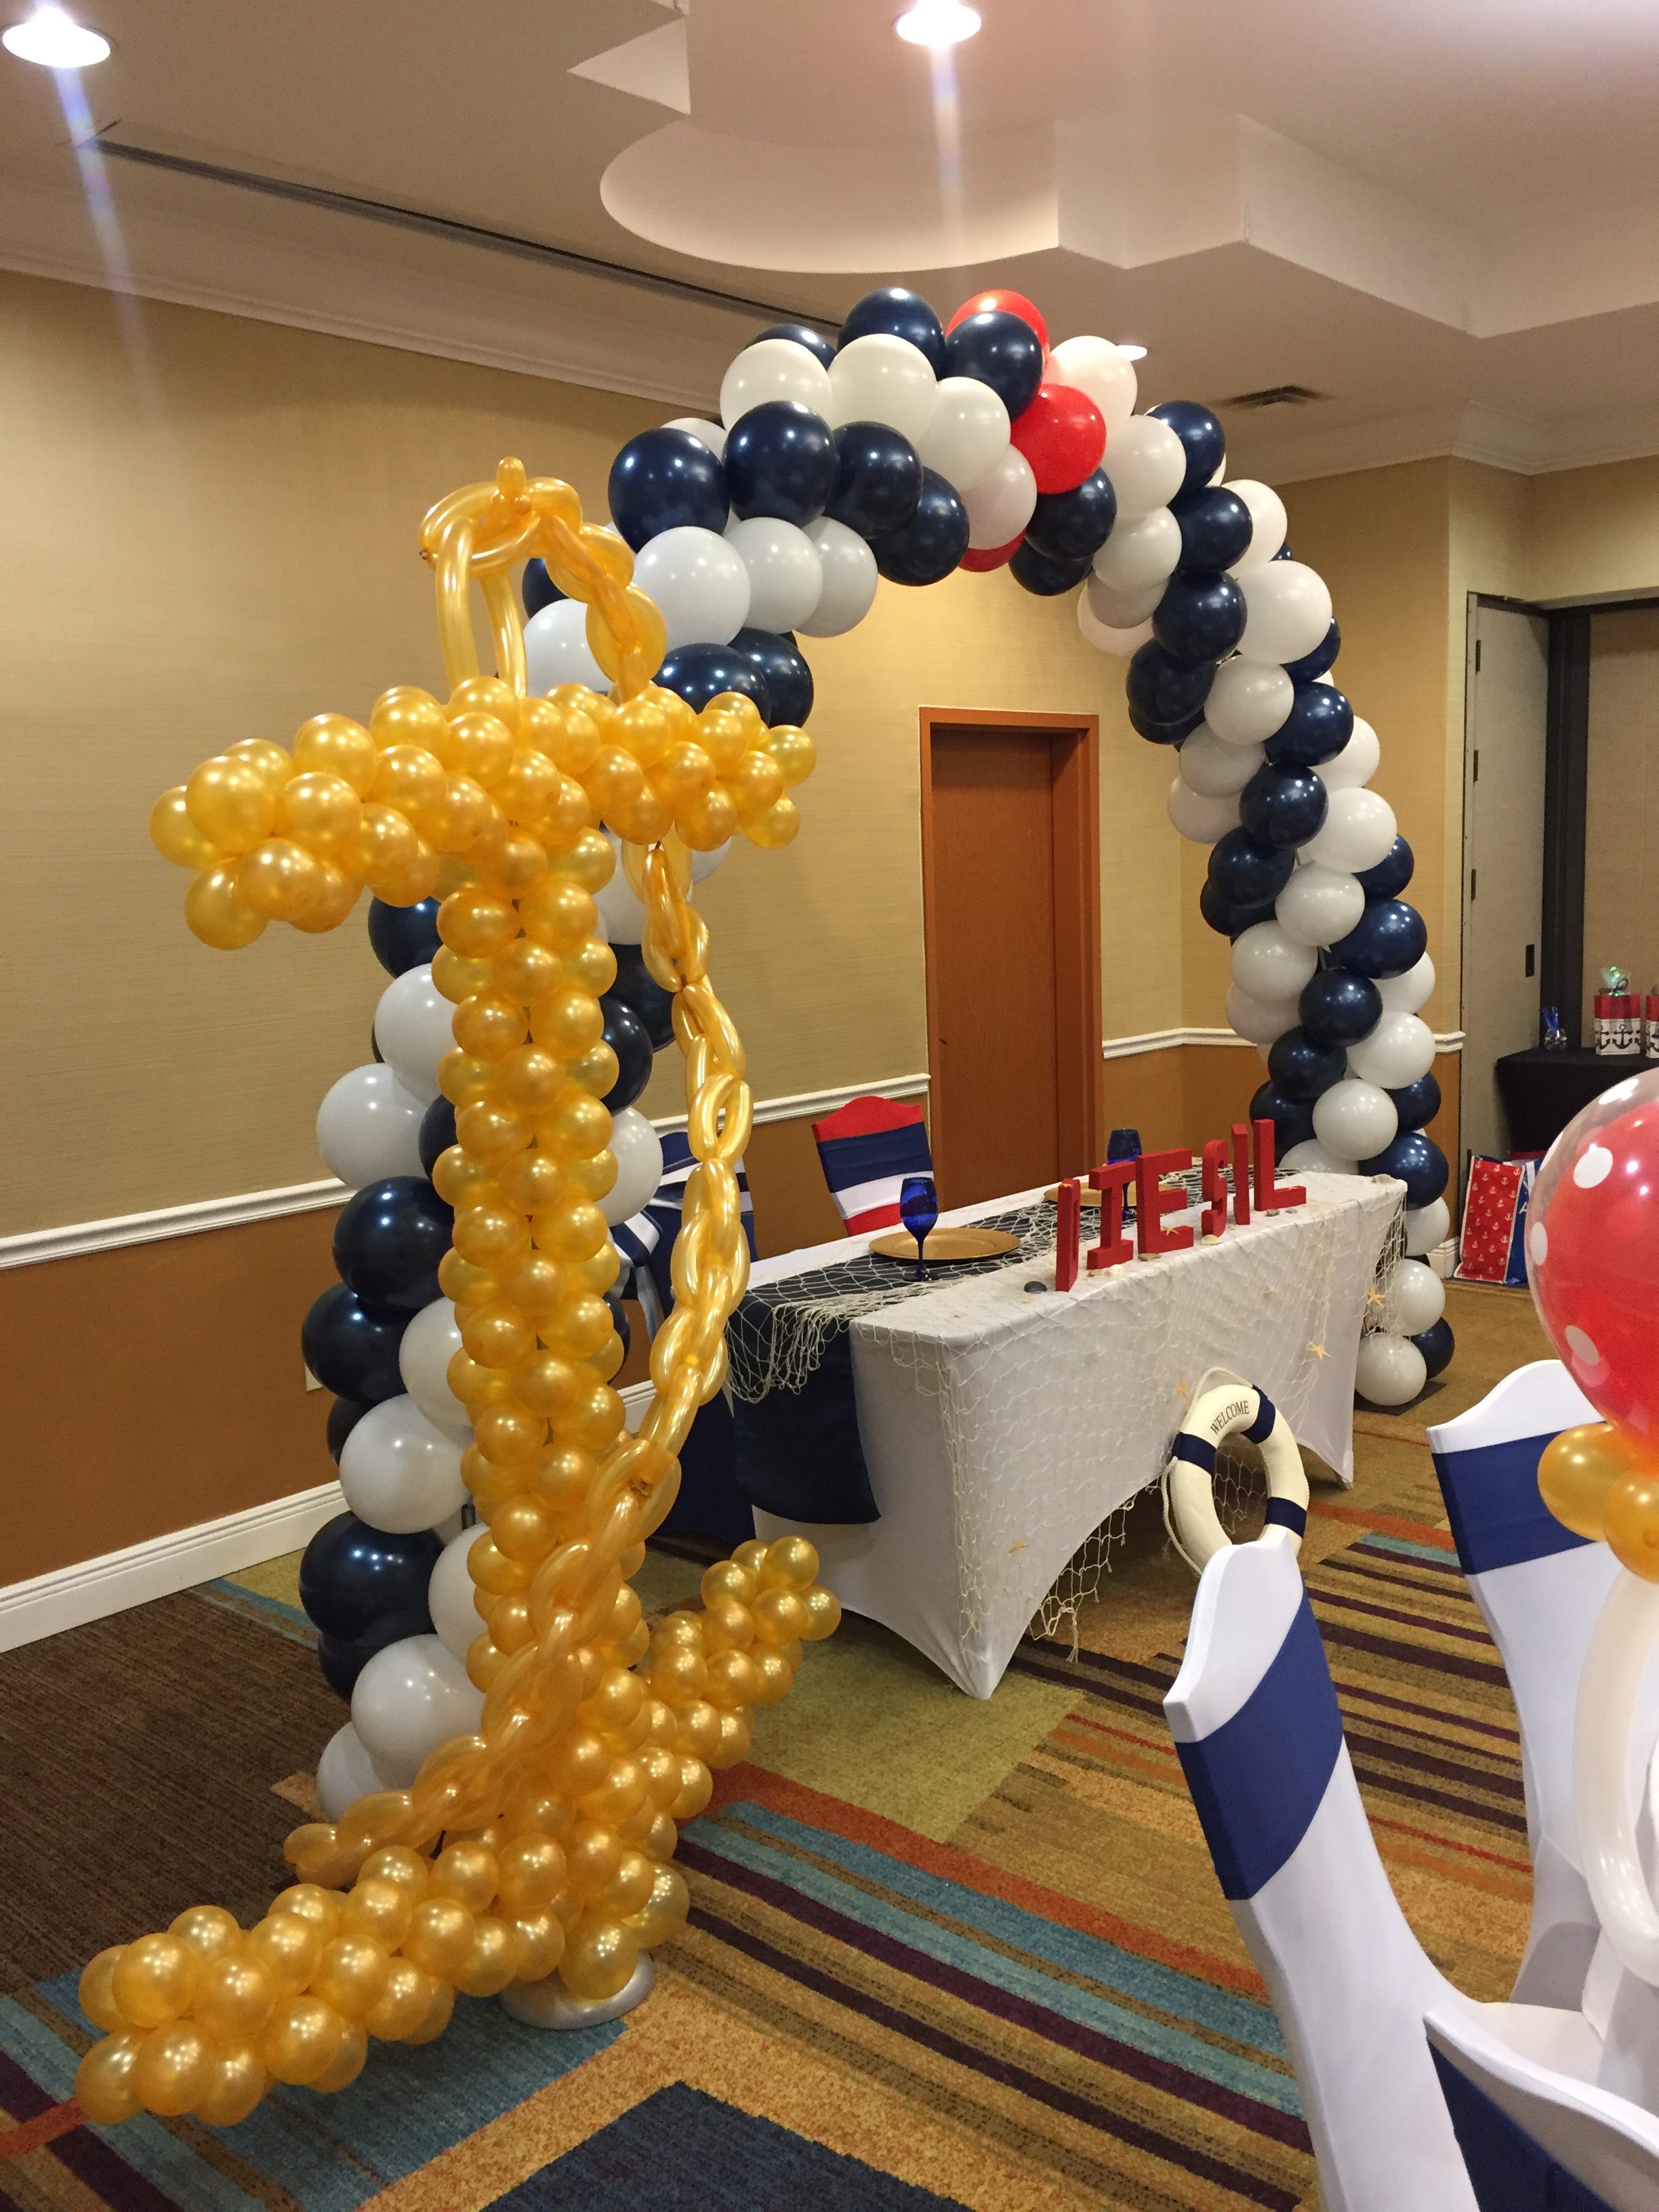 Oracle Balloon Company – We breathe life into your event, the rest is just  hot air!